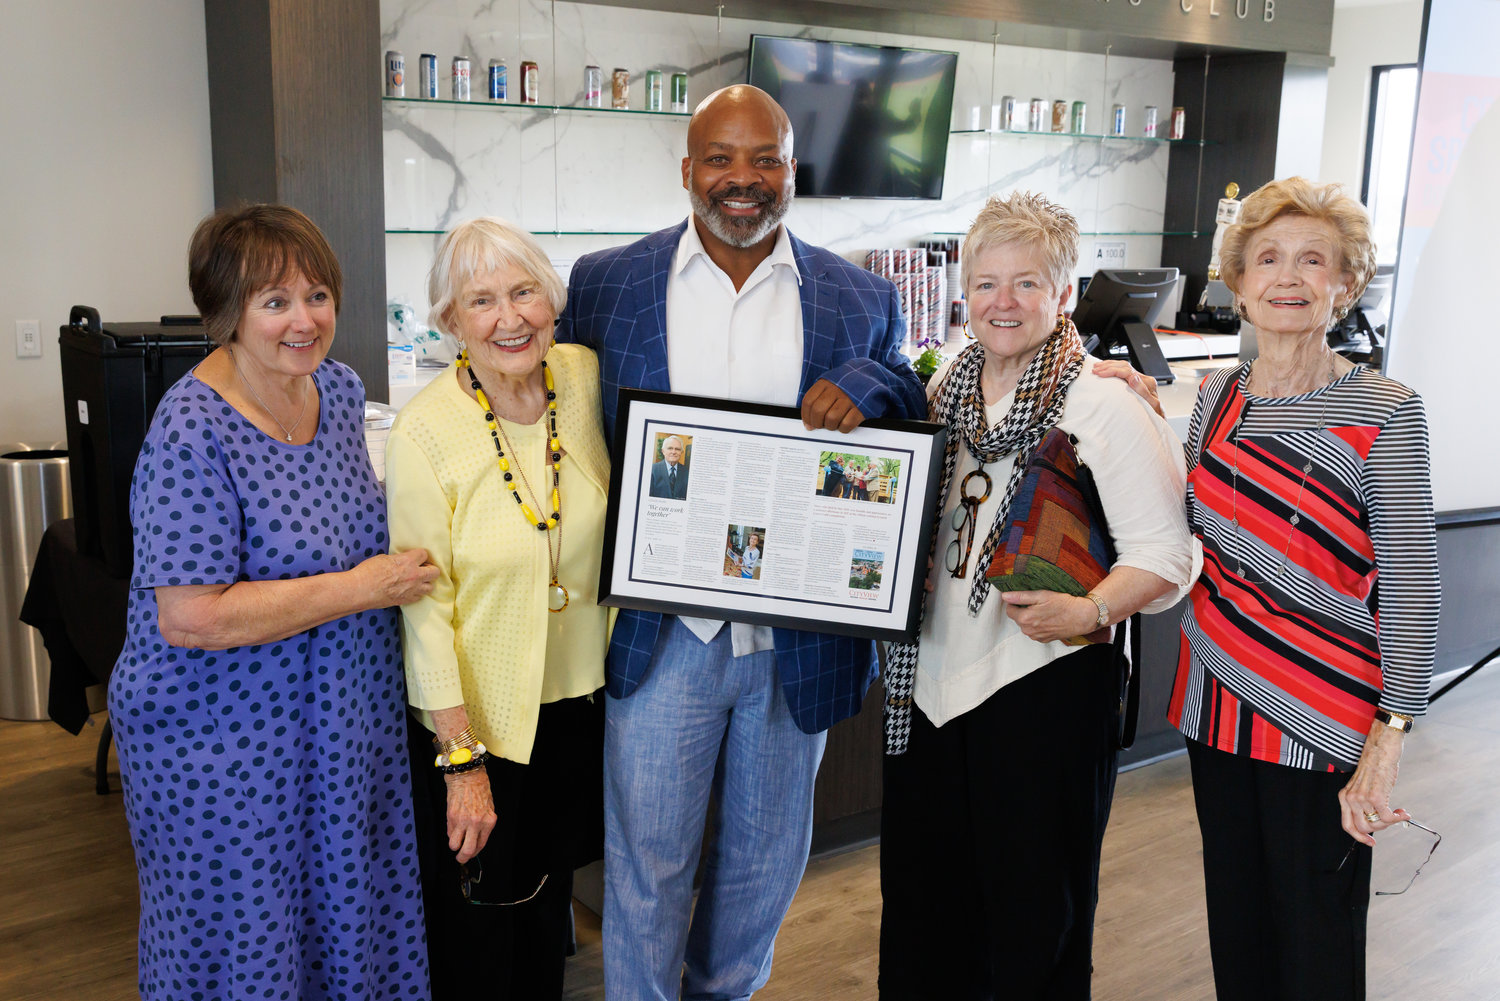 Daughter Sally Shaw Schmitz, sister Gillie Revelle, Cross Creek Linear Park landscape engineer Anthony Ramsey, daughter Faison Shaw Covington and widow Claire Shaw pose with the Harry Shaw Downtown Visionary award.